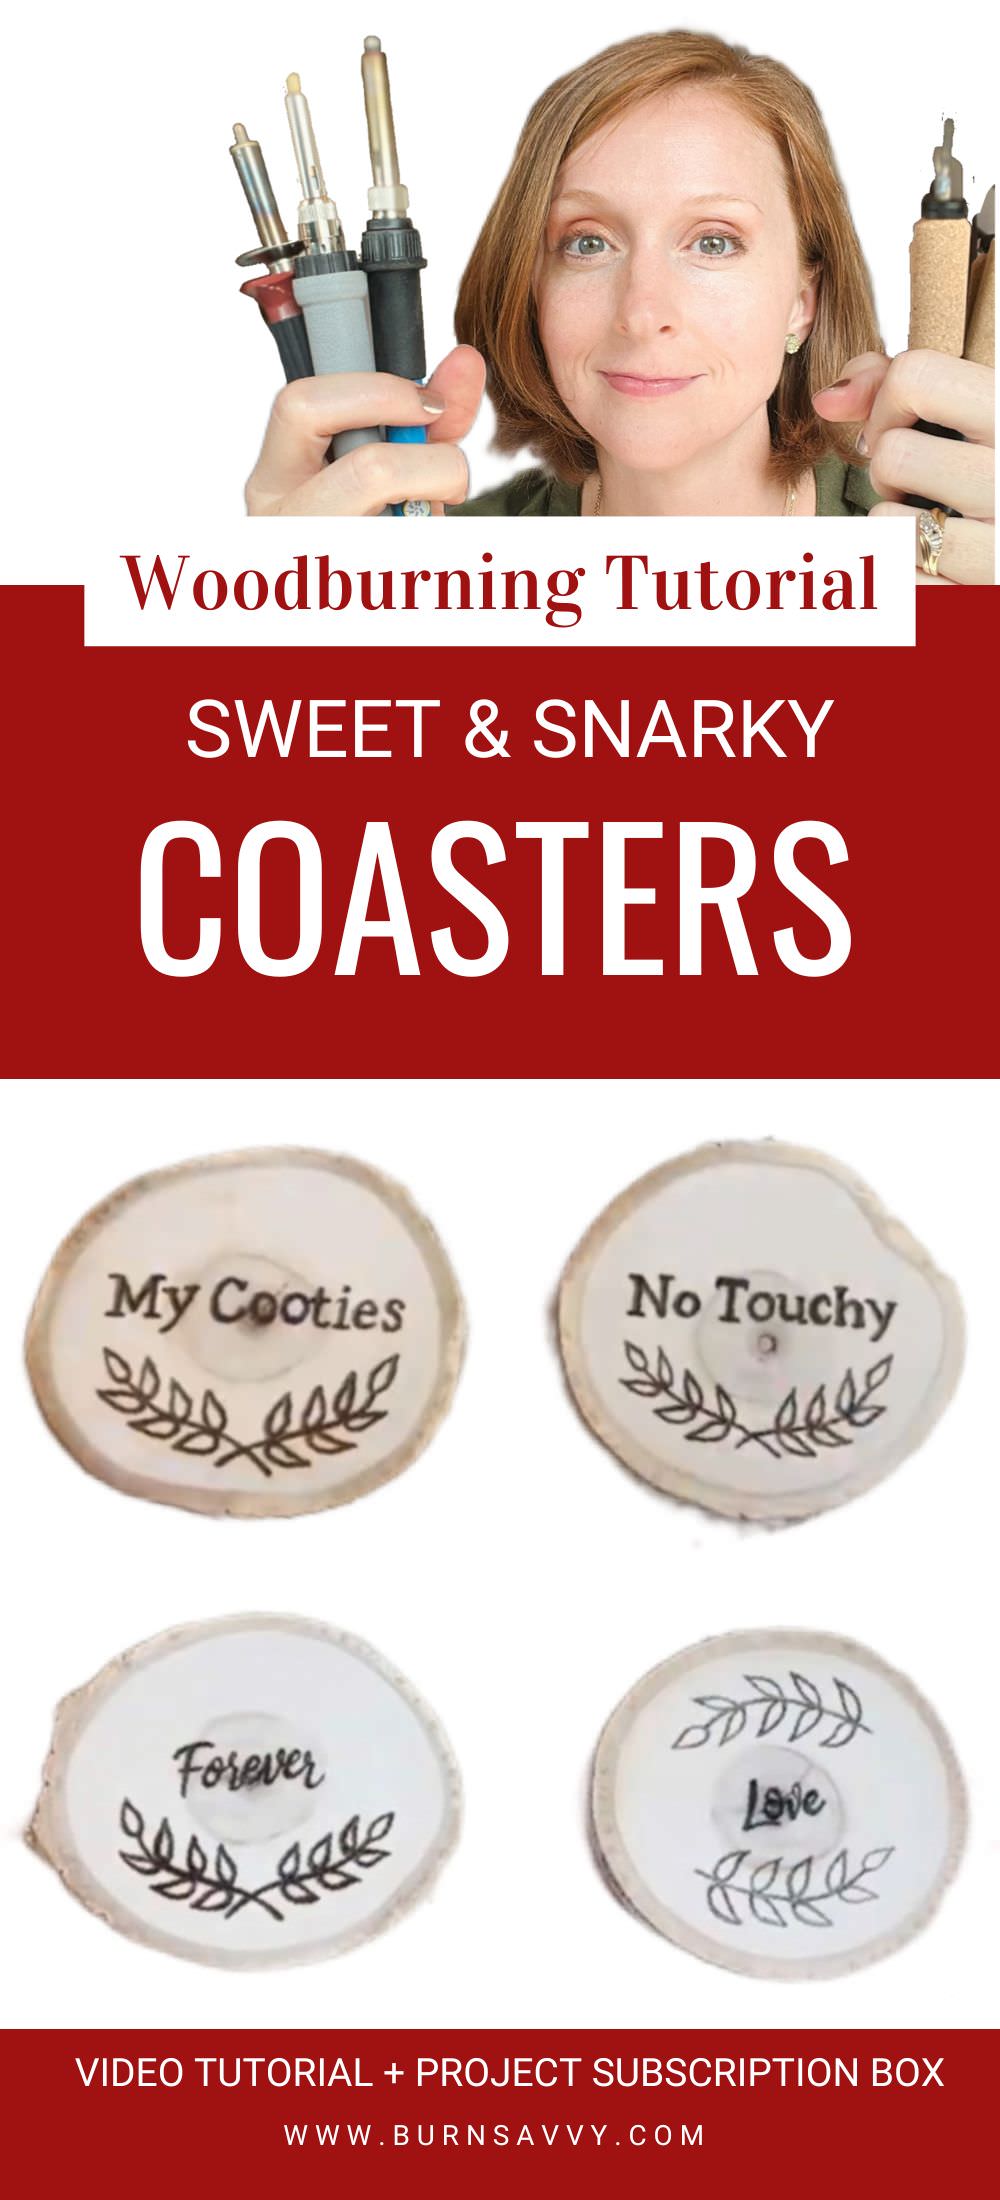 April Crate Club - Sweet and Snarky Coasters Video Tutorial